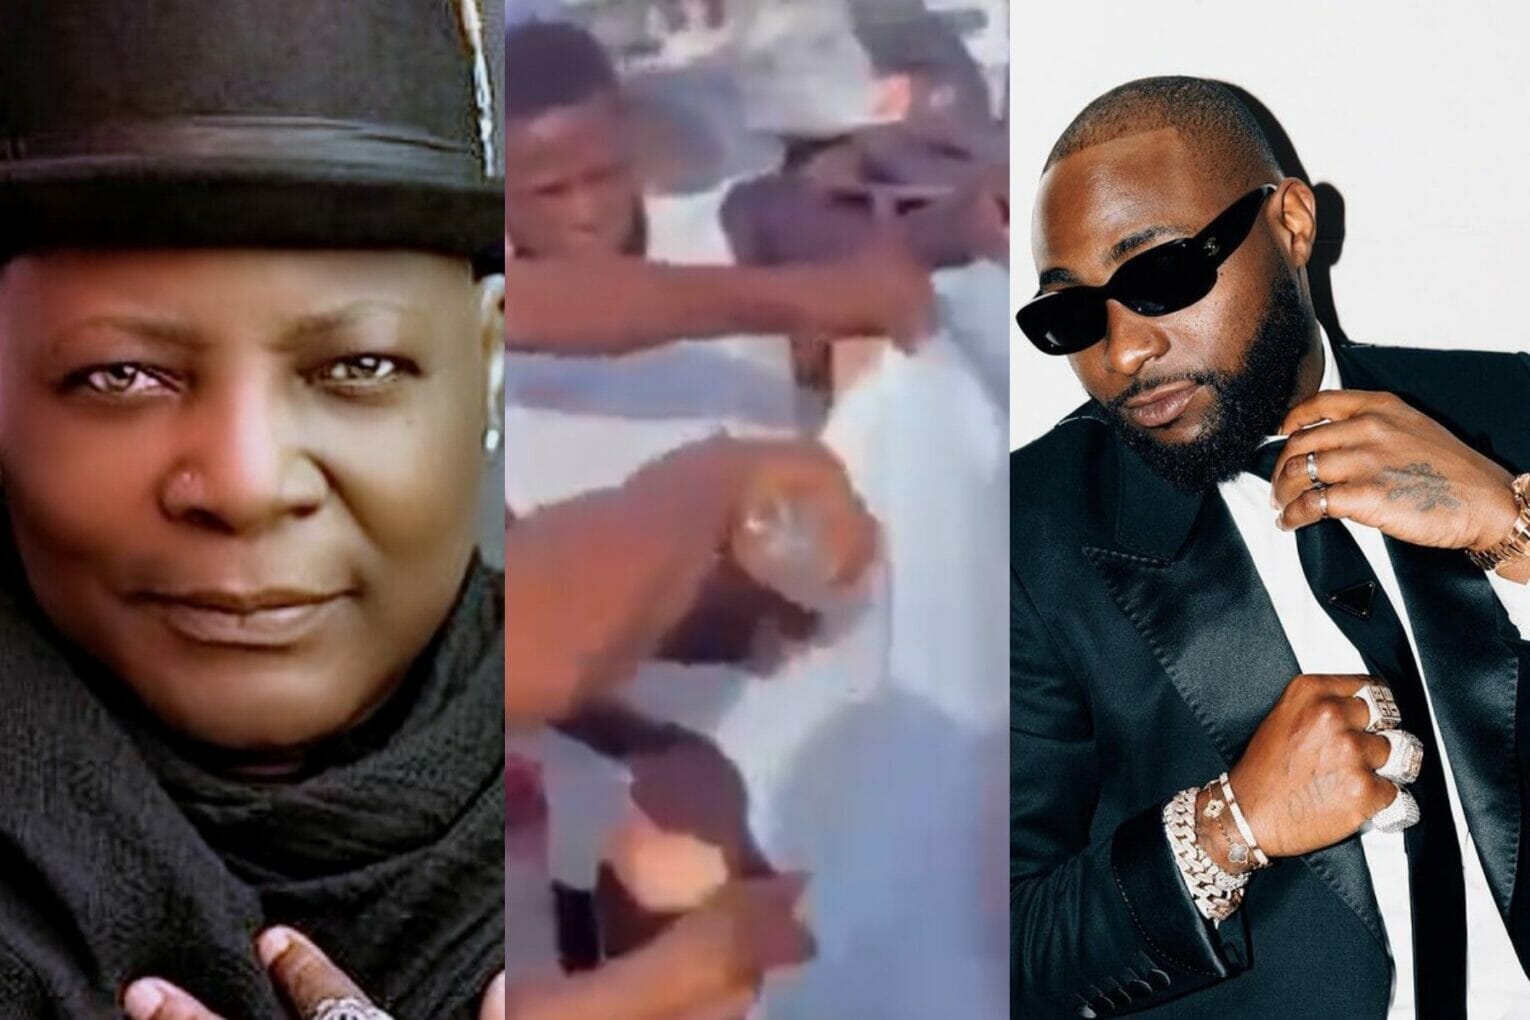 Charly Boy and Wole Soyinka Defend Davido’s Controversial Music Video